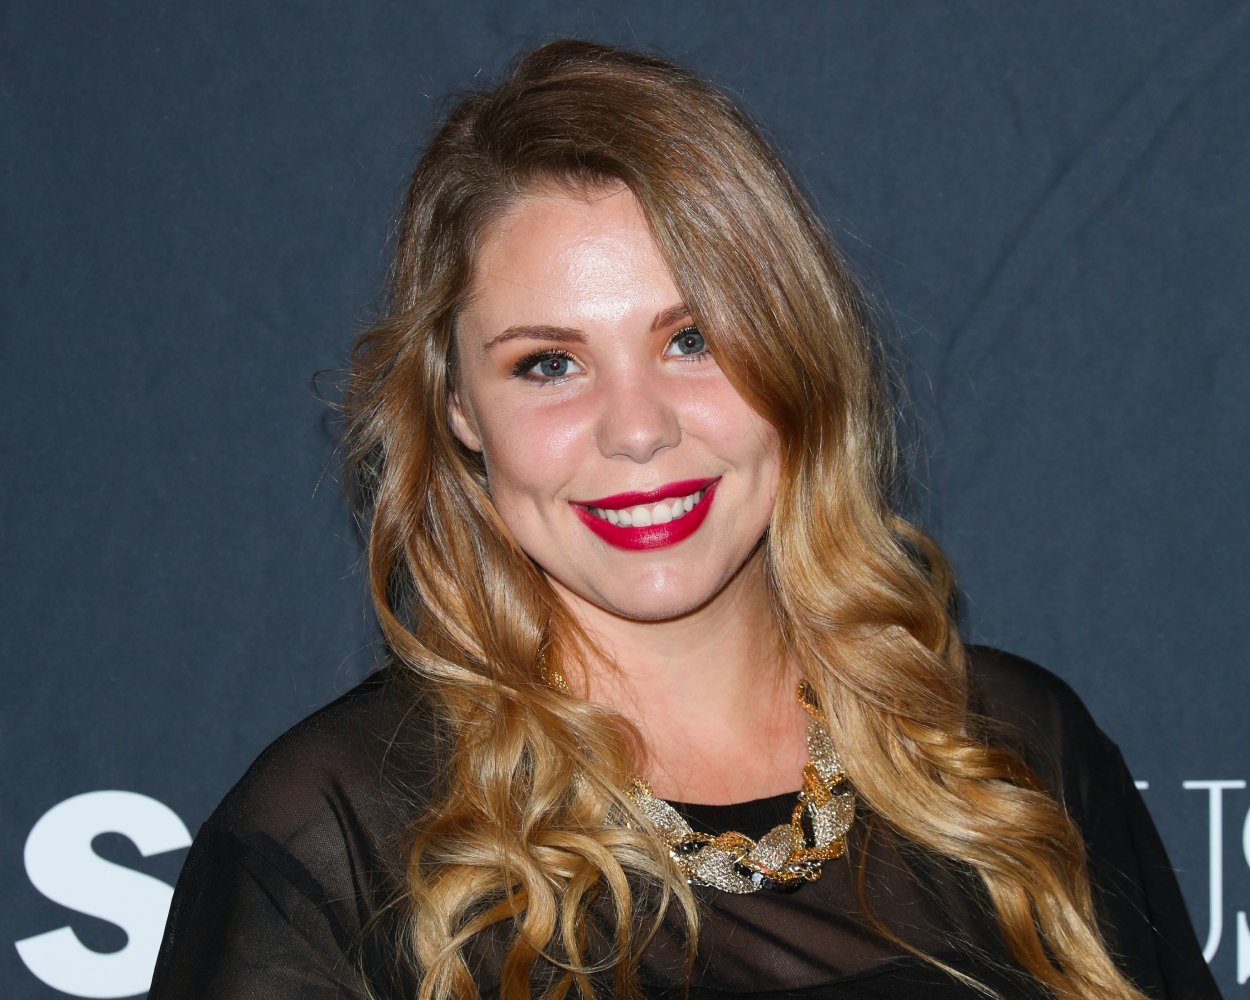 'Teen Mom' star Kailyn Lowry posing and smiling as she attends Star Magazine's Scene Stealers party